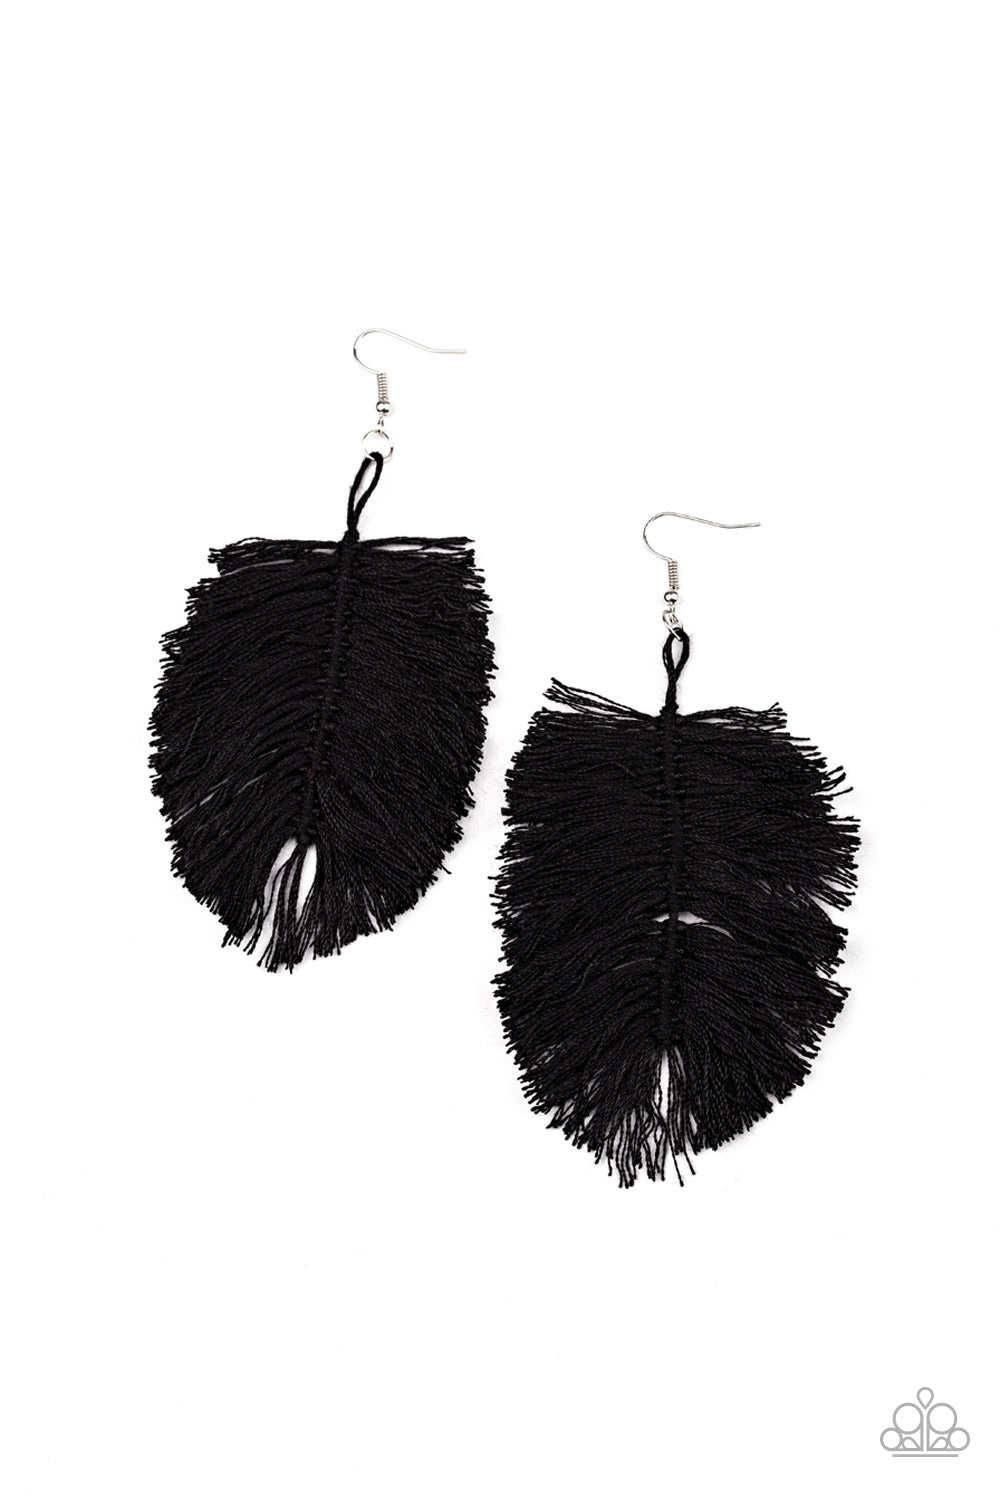 Paparazzi Accessories Earrings - Featuring a shiny black hue, a loop of thread gives way to a leafy black fringe, creating a statement-making texture. 